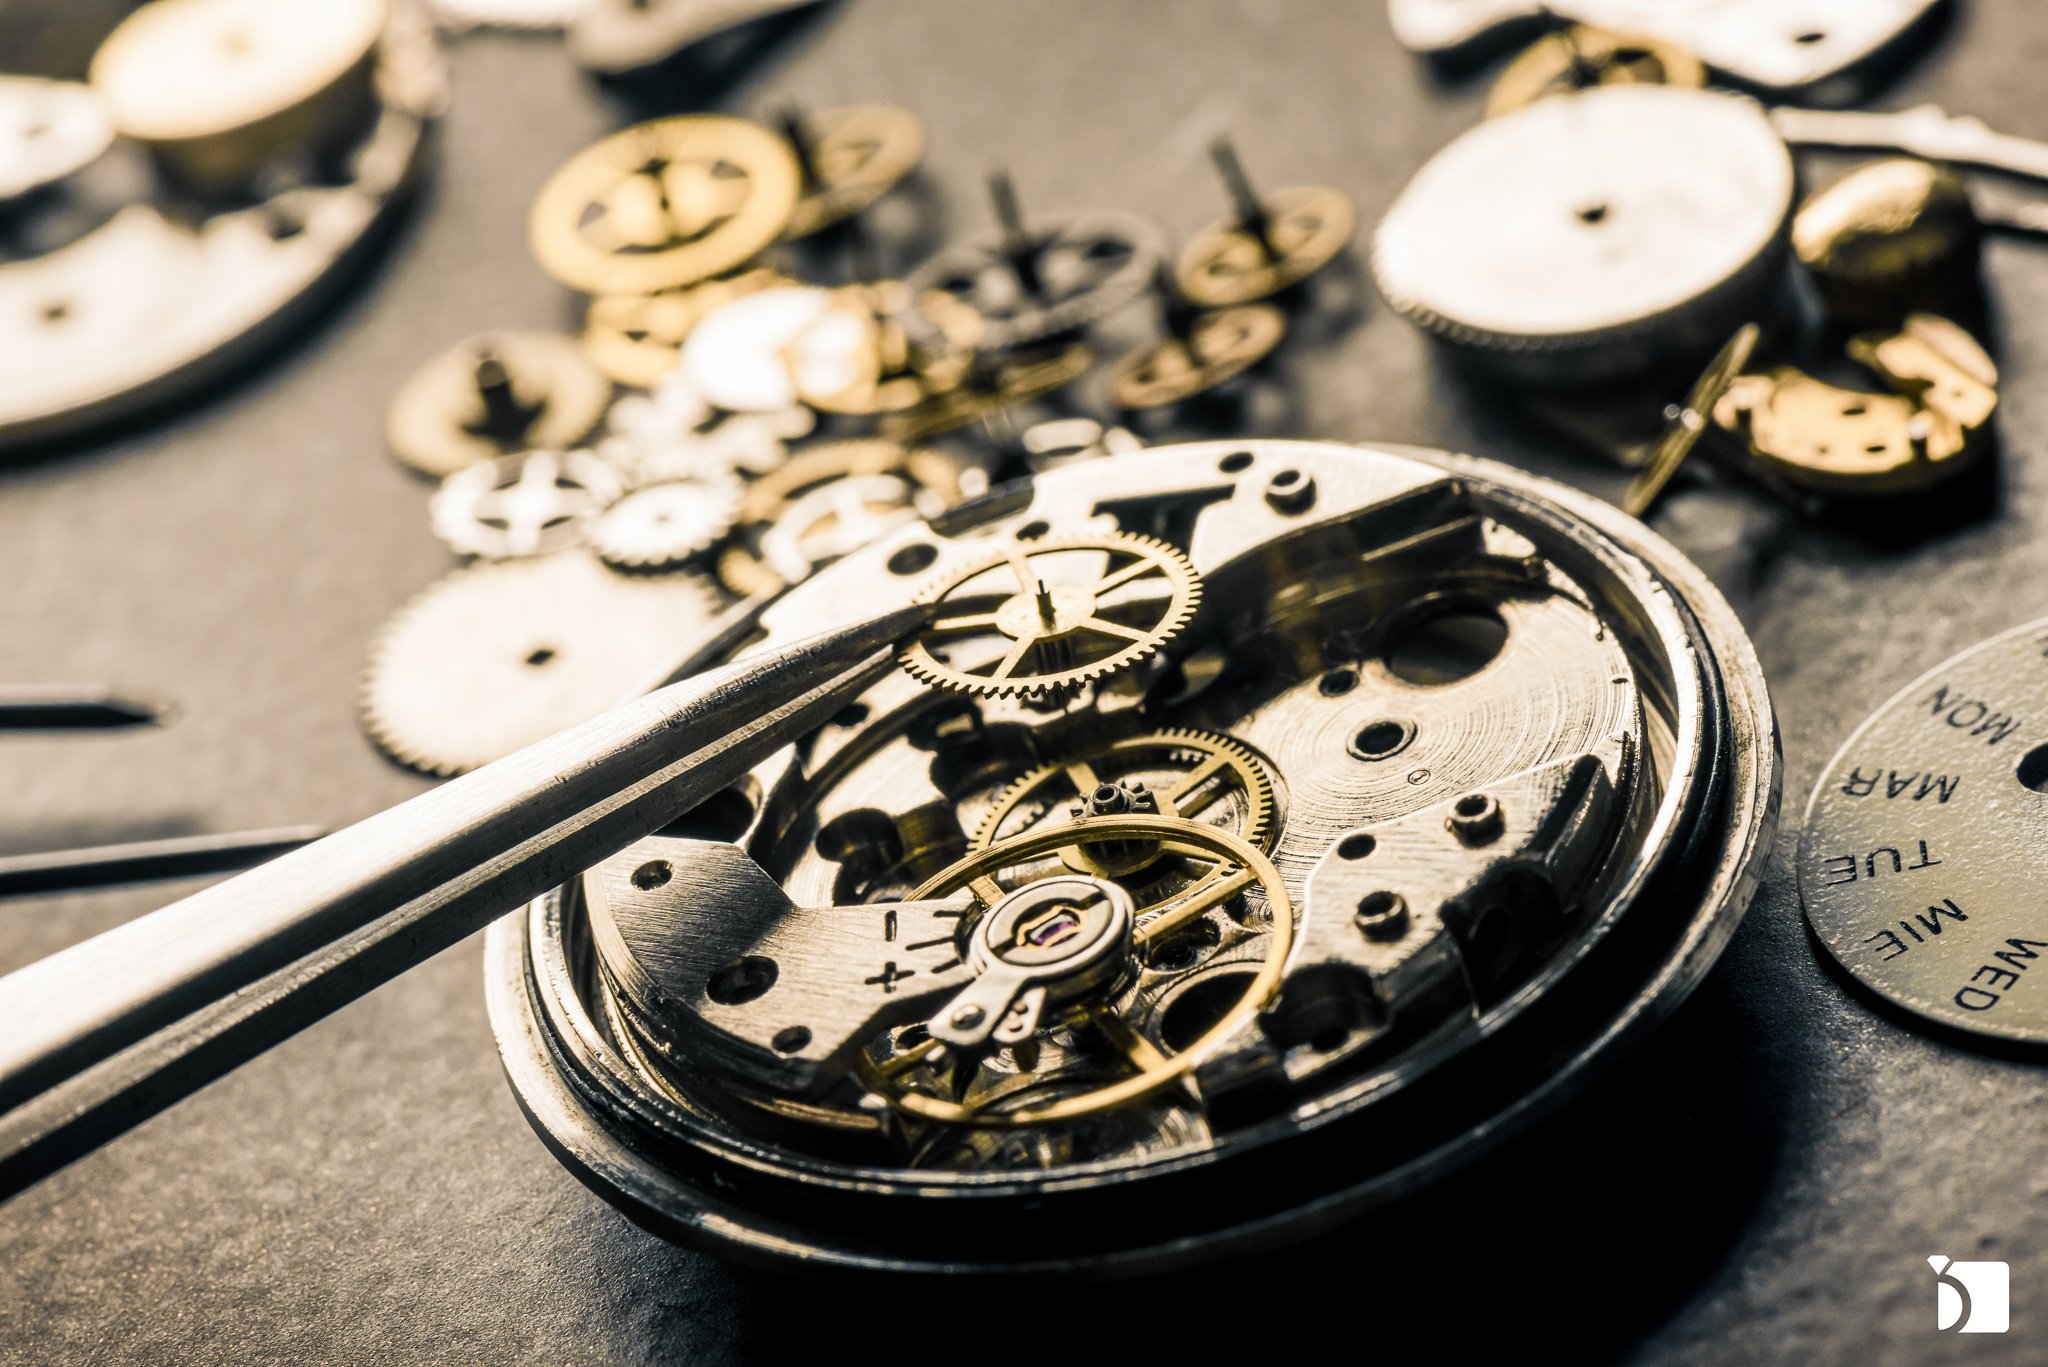 Open faced watch getting repaired, watch movement repair service